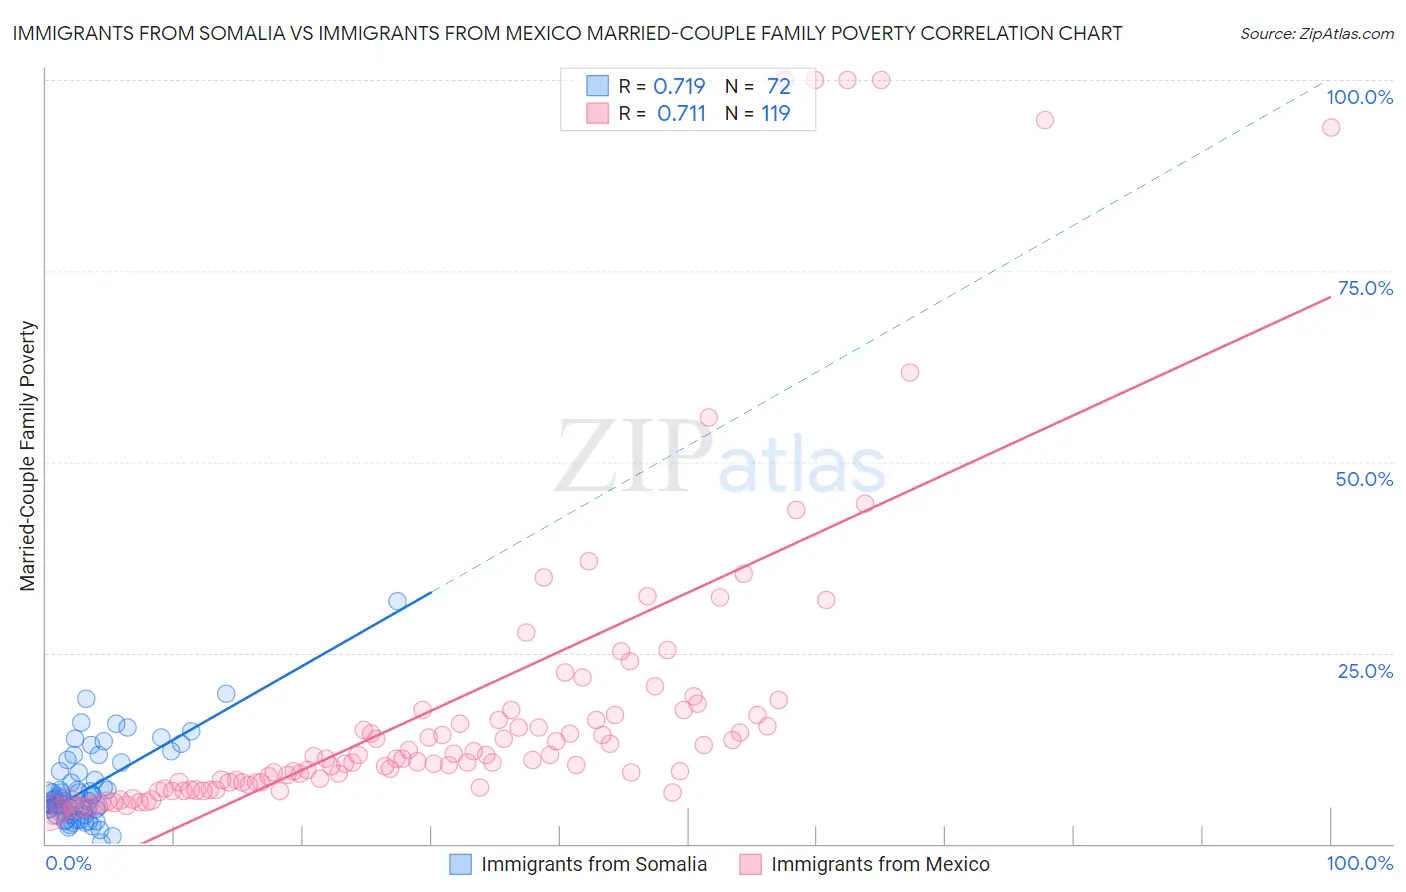 Immigrants from Somalia vs Immigrants from Mexico Married-Couple Family Poverty